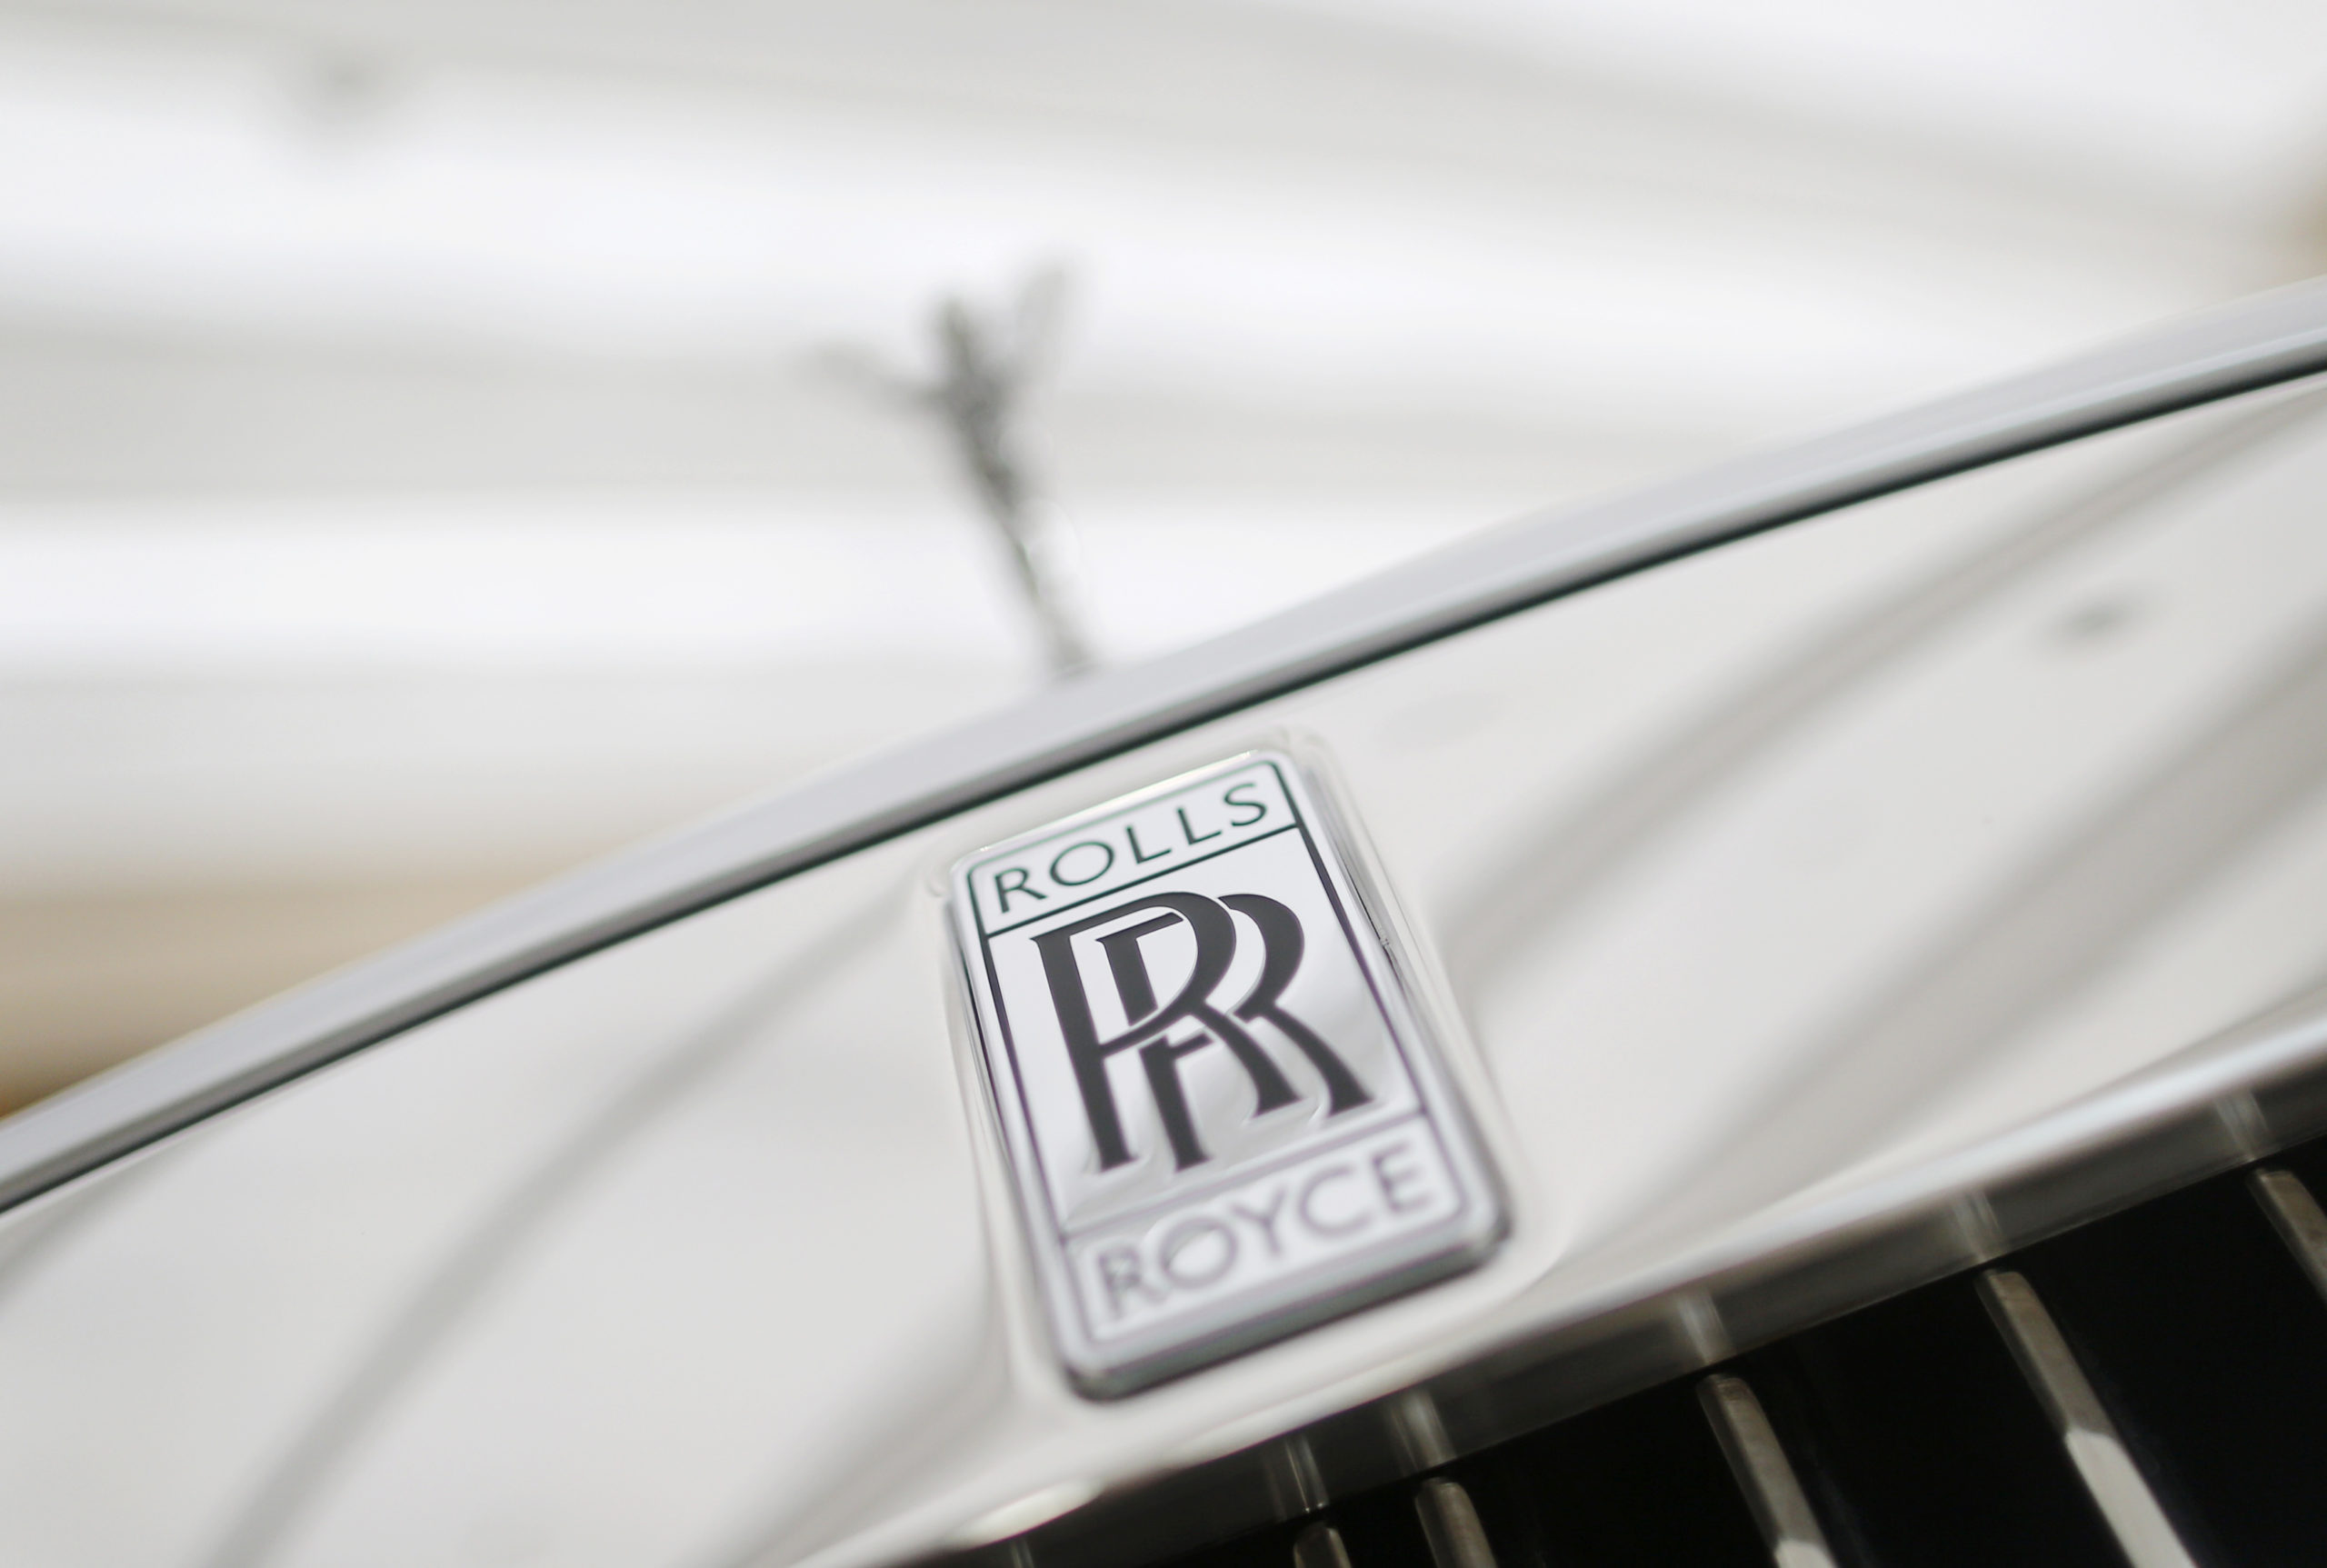 A Rolls-Royce mascot known as 'Spirit of Ecstasy' stands above the brand's logo on the front of a Rolls-Royce Ghost in a showroom in Singapore October 8, 2013.